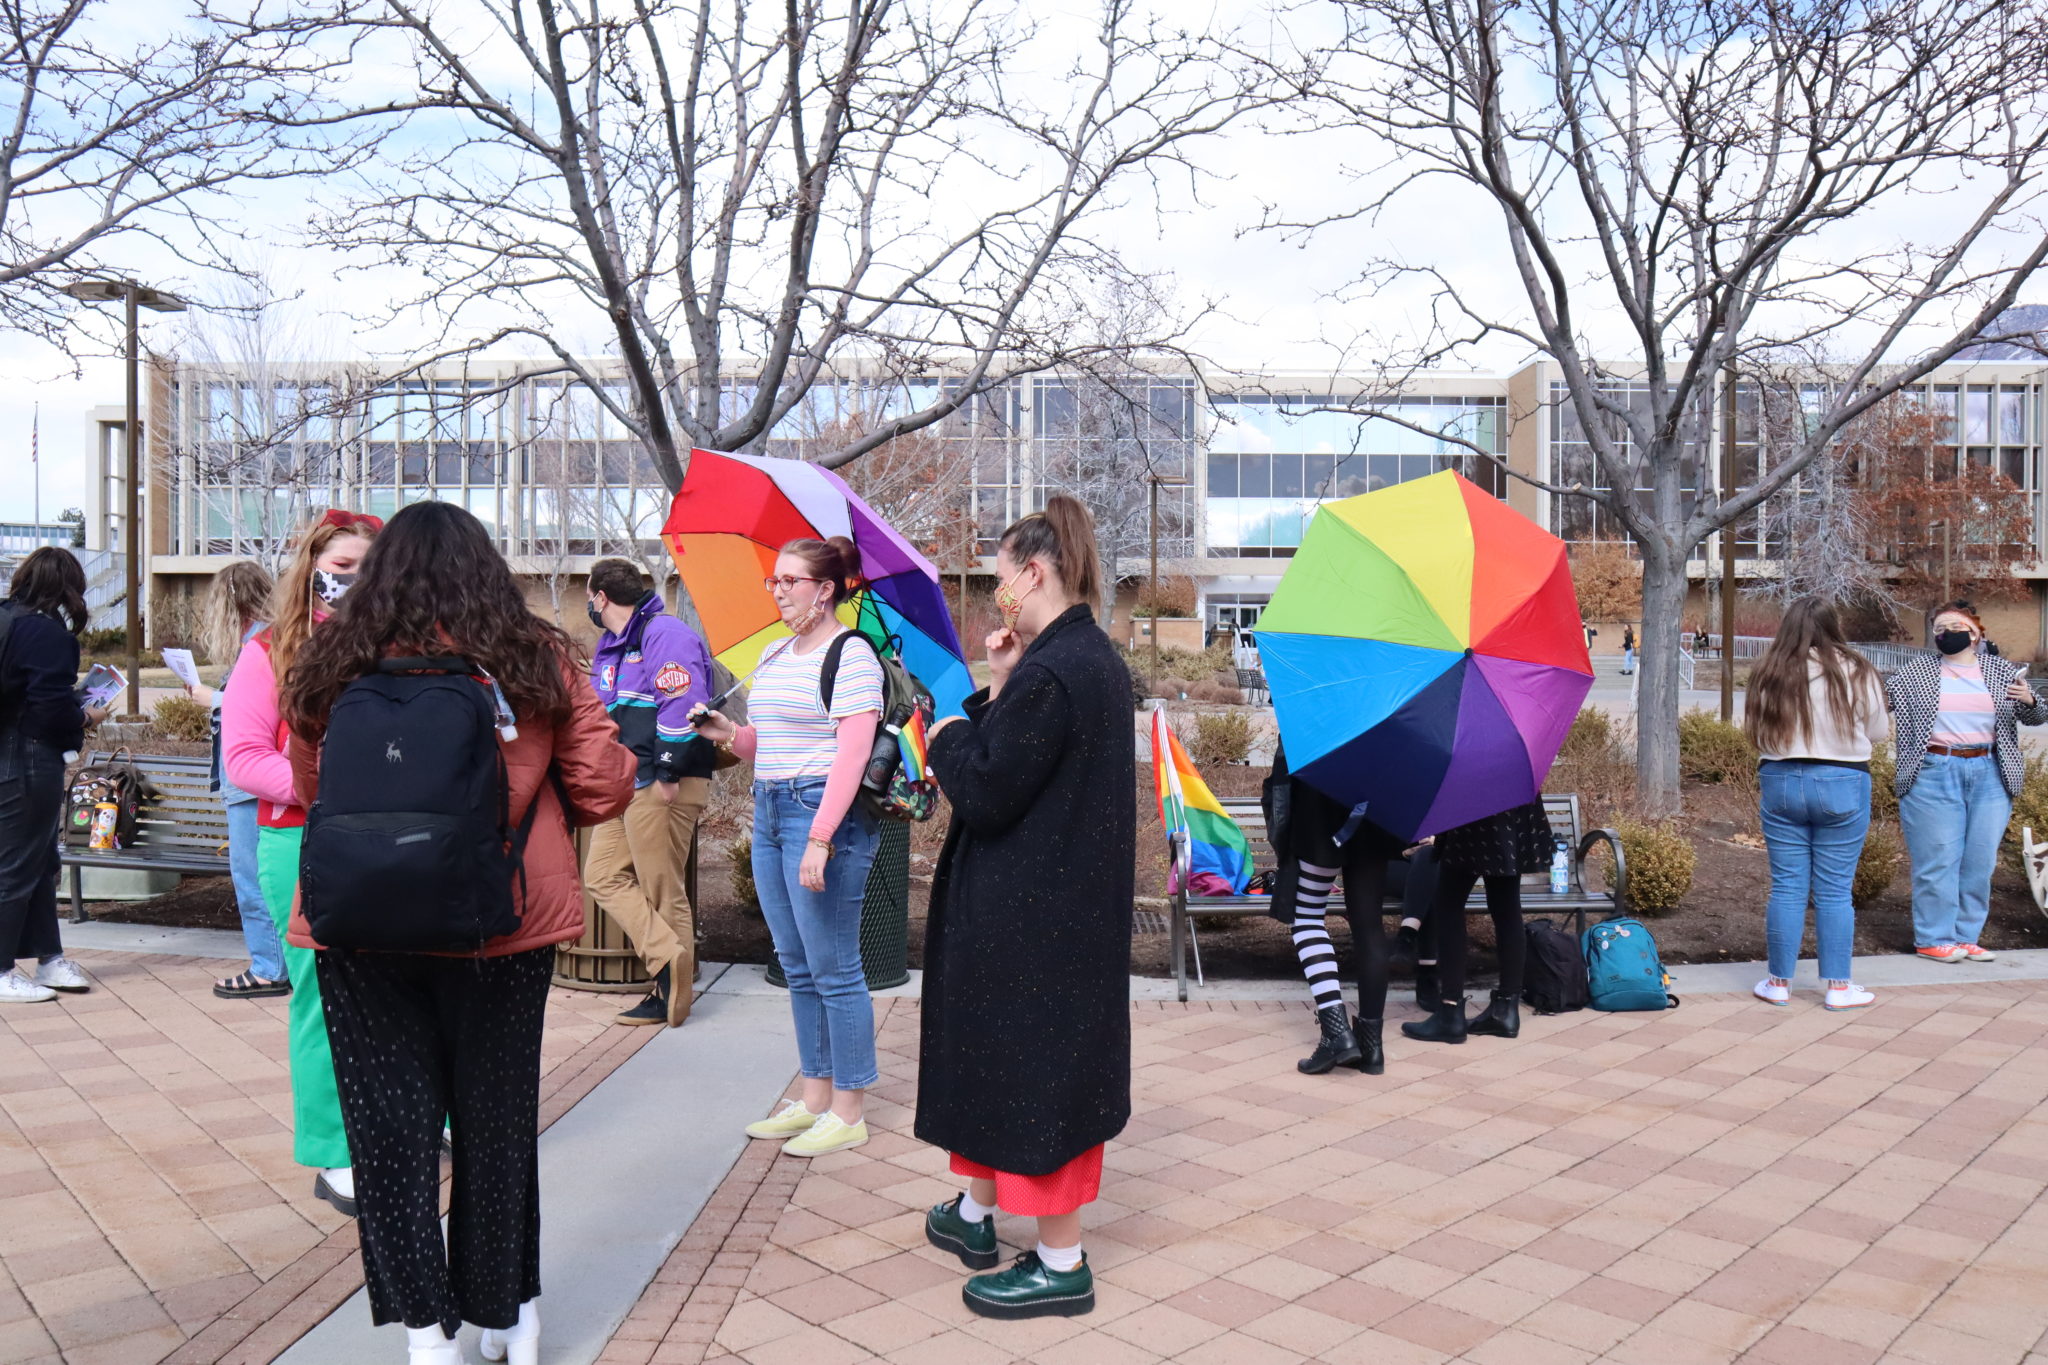 BYU 'Rainbow Day' participants show support for LGBT community while